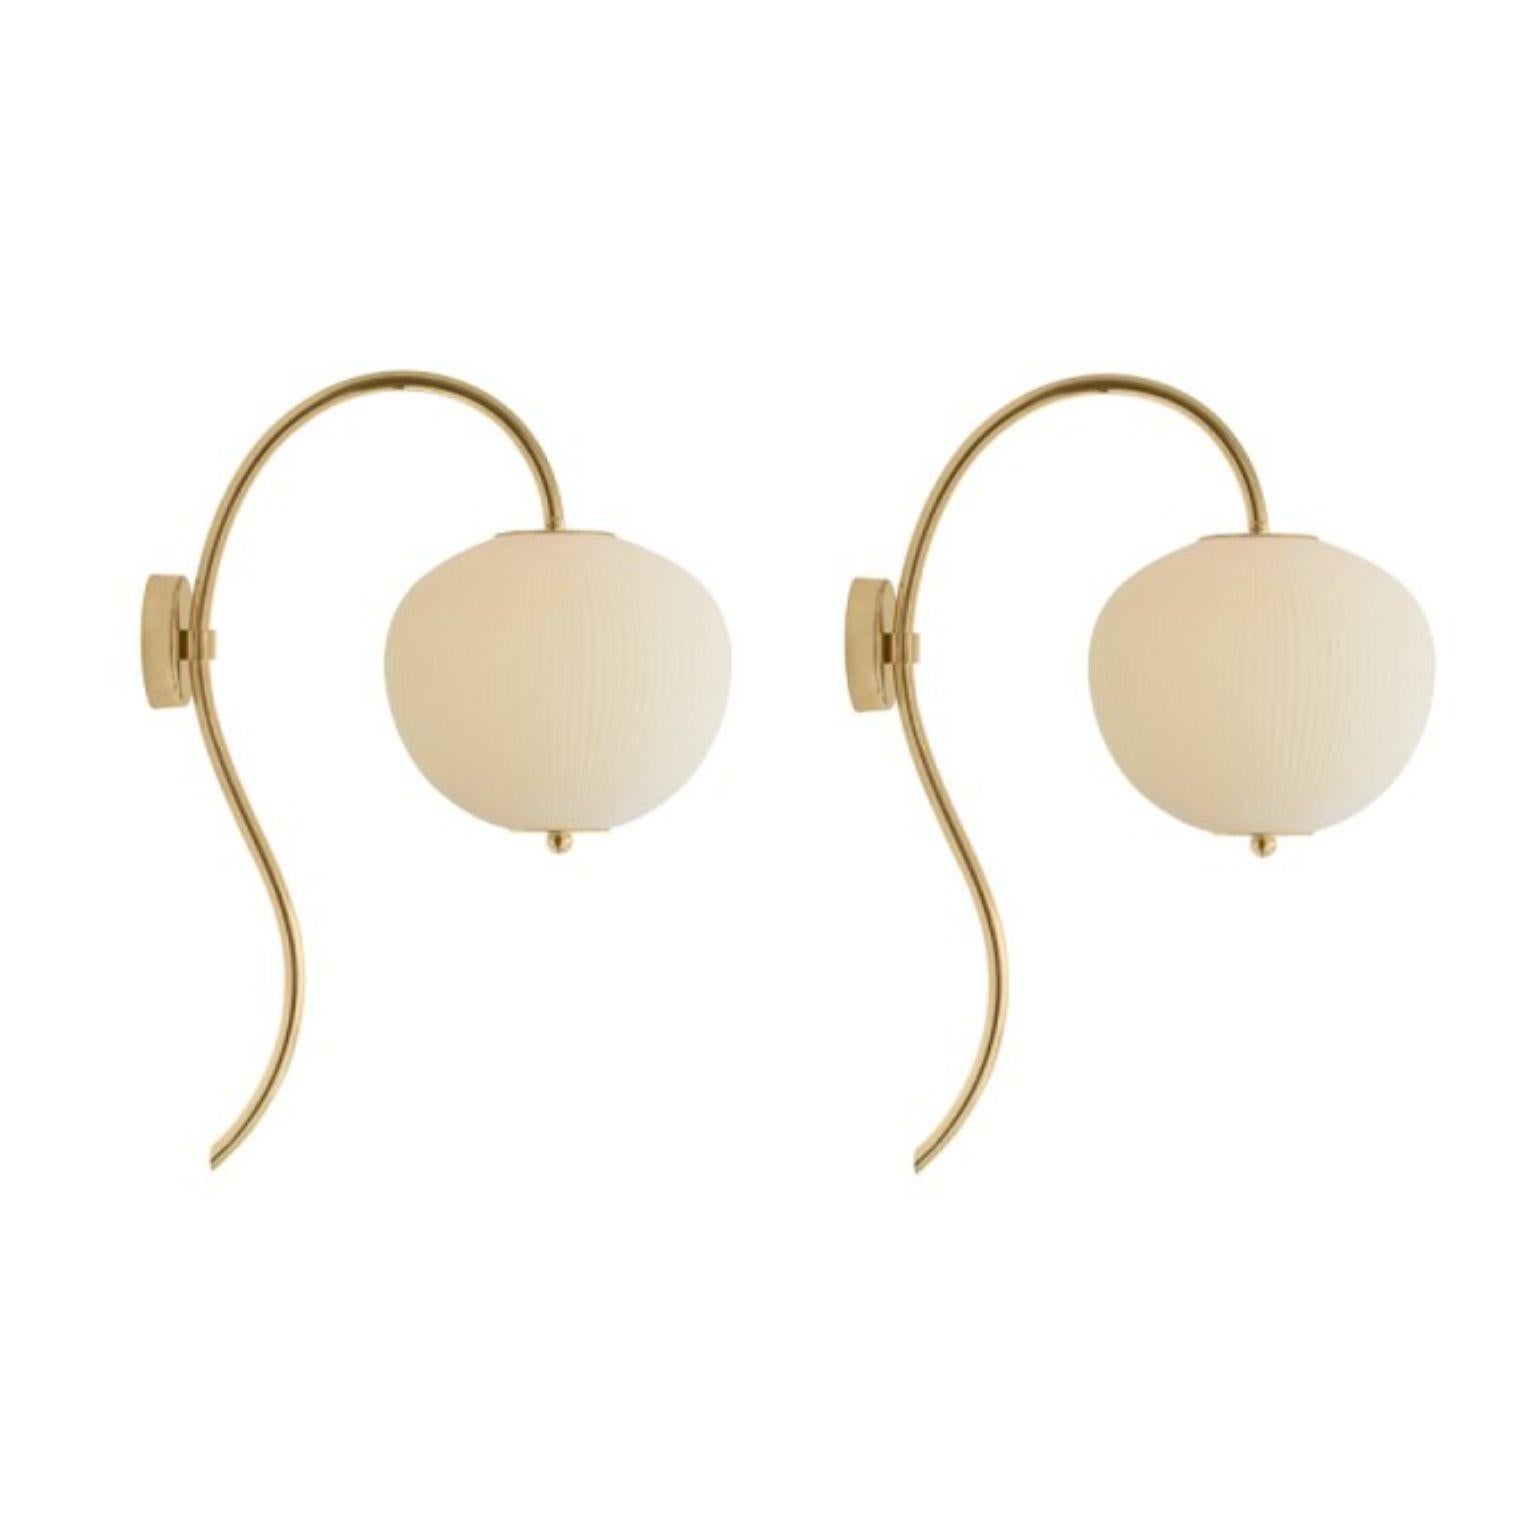 Wall lamp China 03 by Magic Circus Editions
Dimensions: H 62 x W 26.2 x D 41.5 cm
Materials: Brass, mouth blown glass sculpted with a diamond saw
Colour: soft rose

Available finishes: Brass, nickel
Available colors: enamel soft white, soft rose,